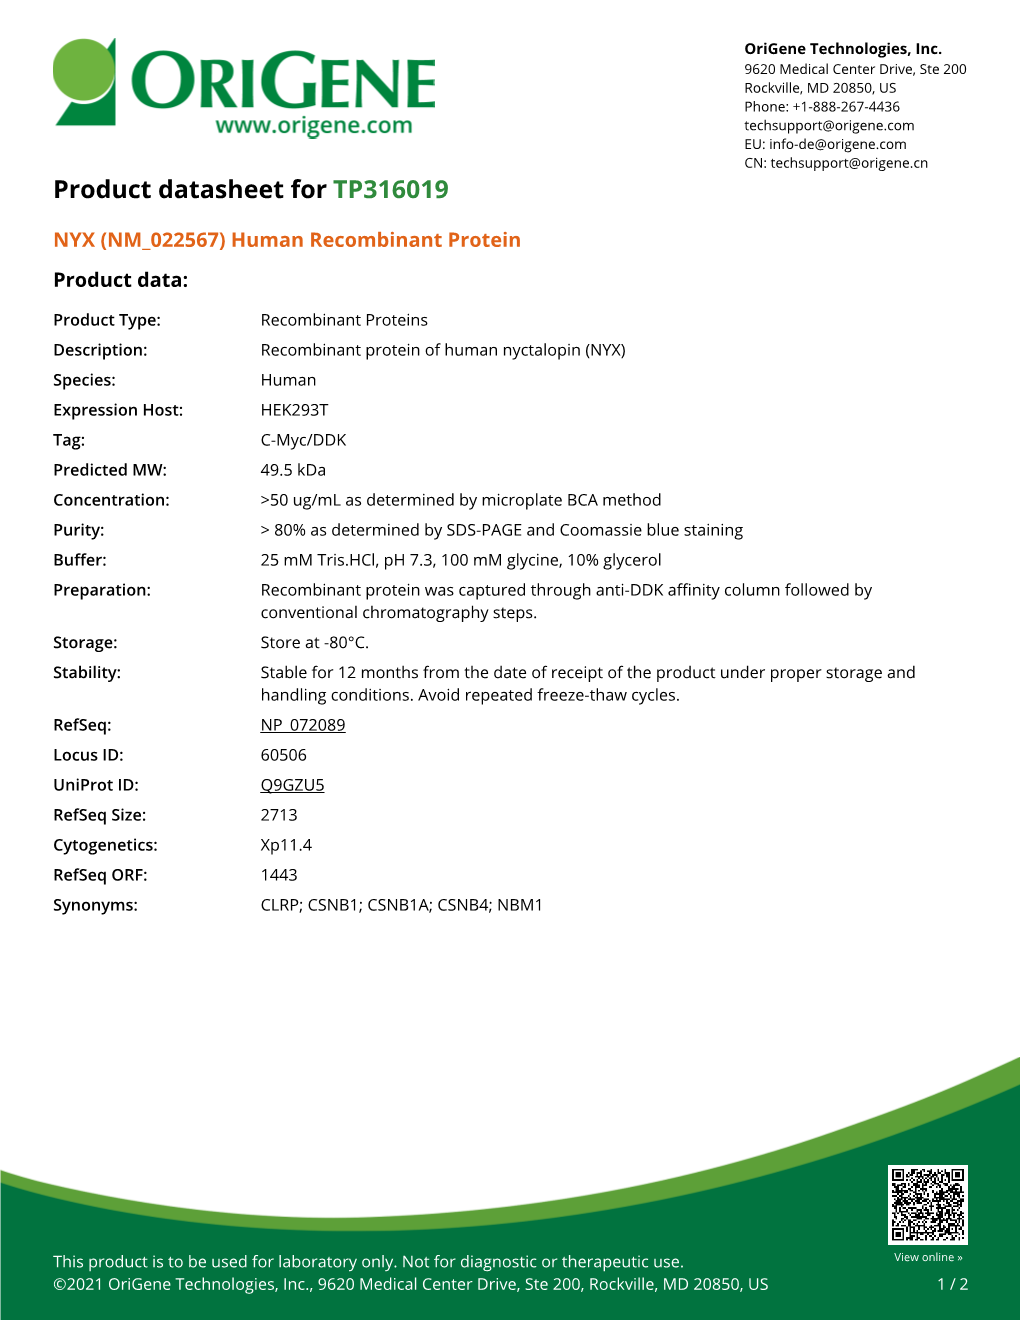 Human Recombinant Protein – TP316019